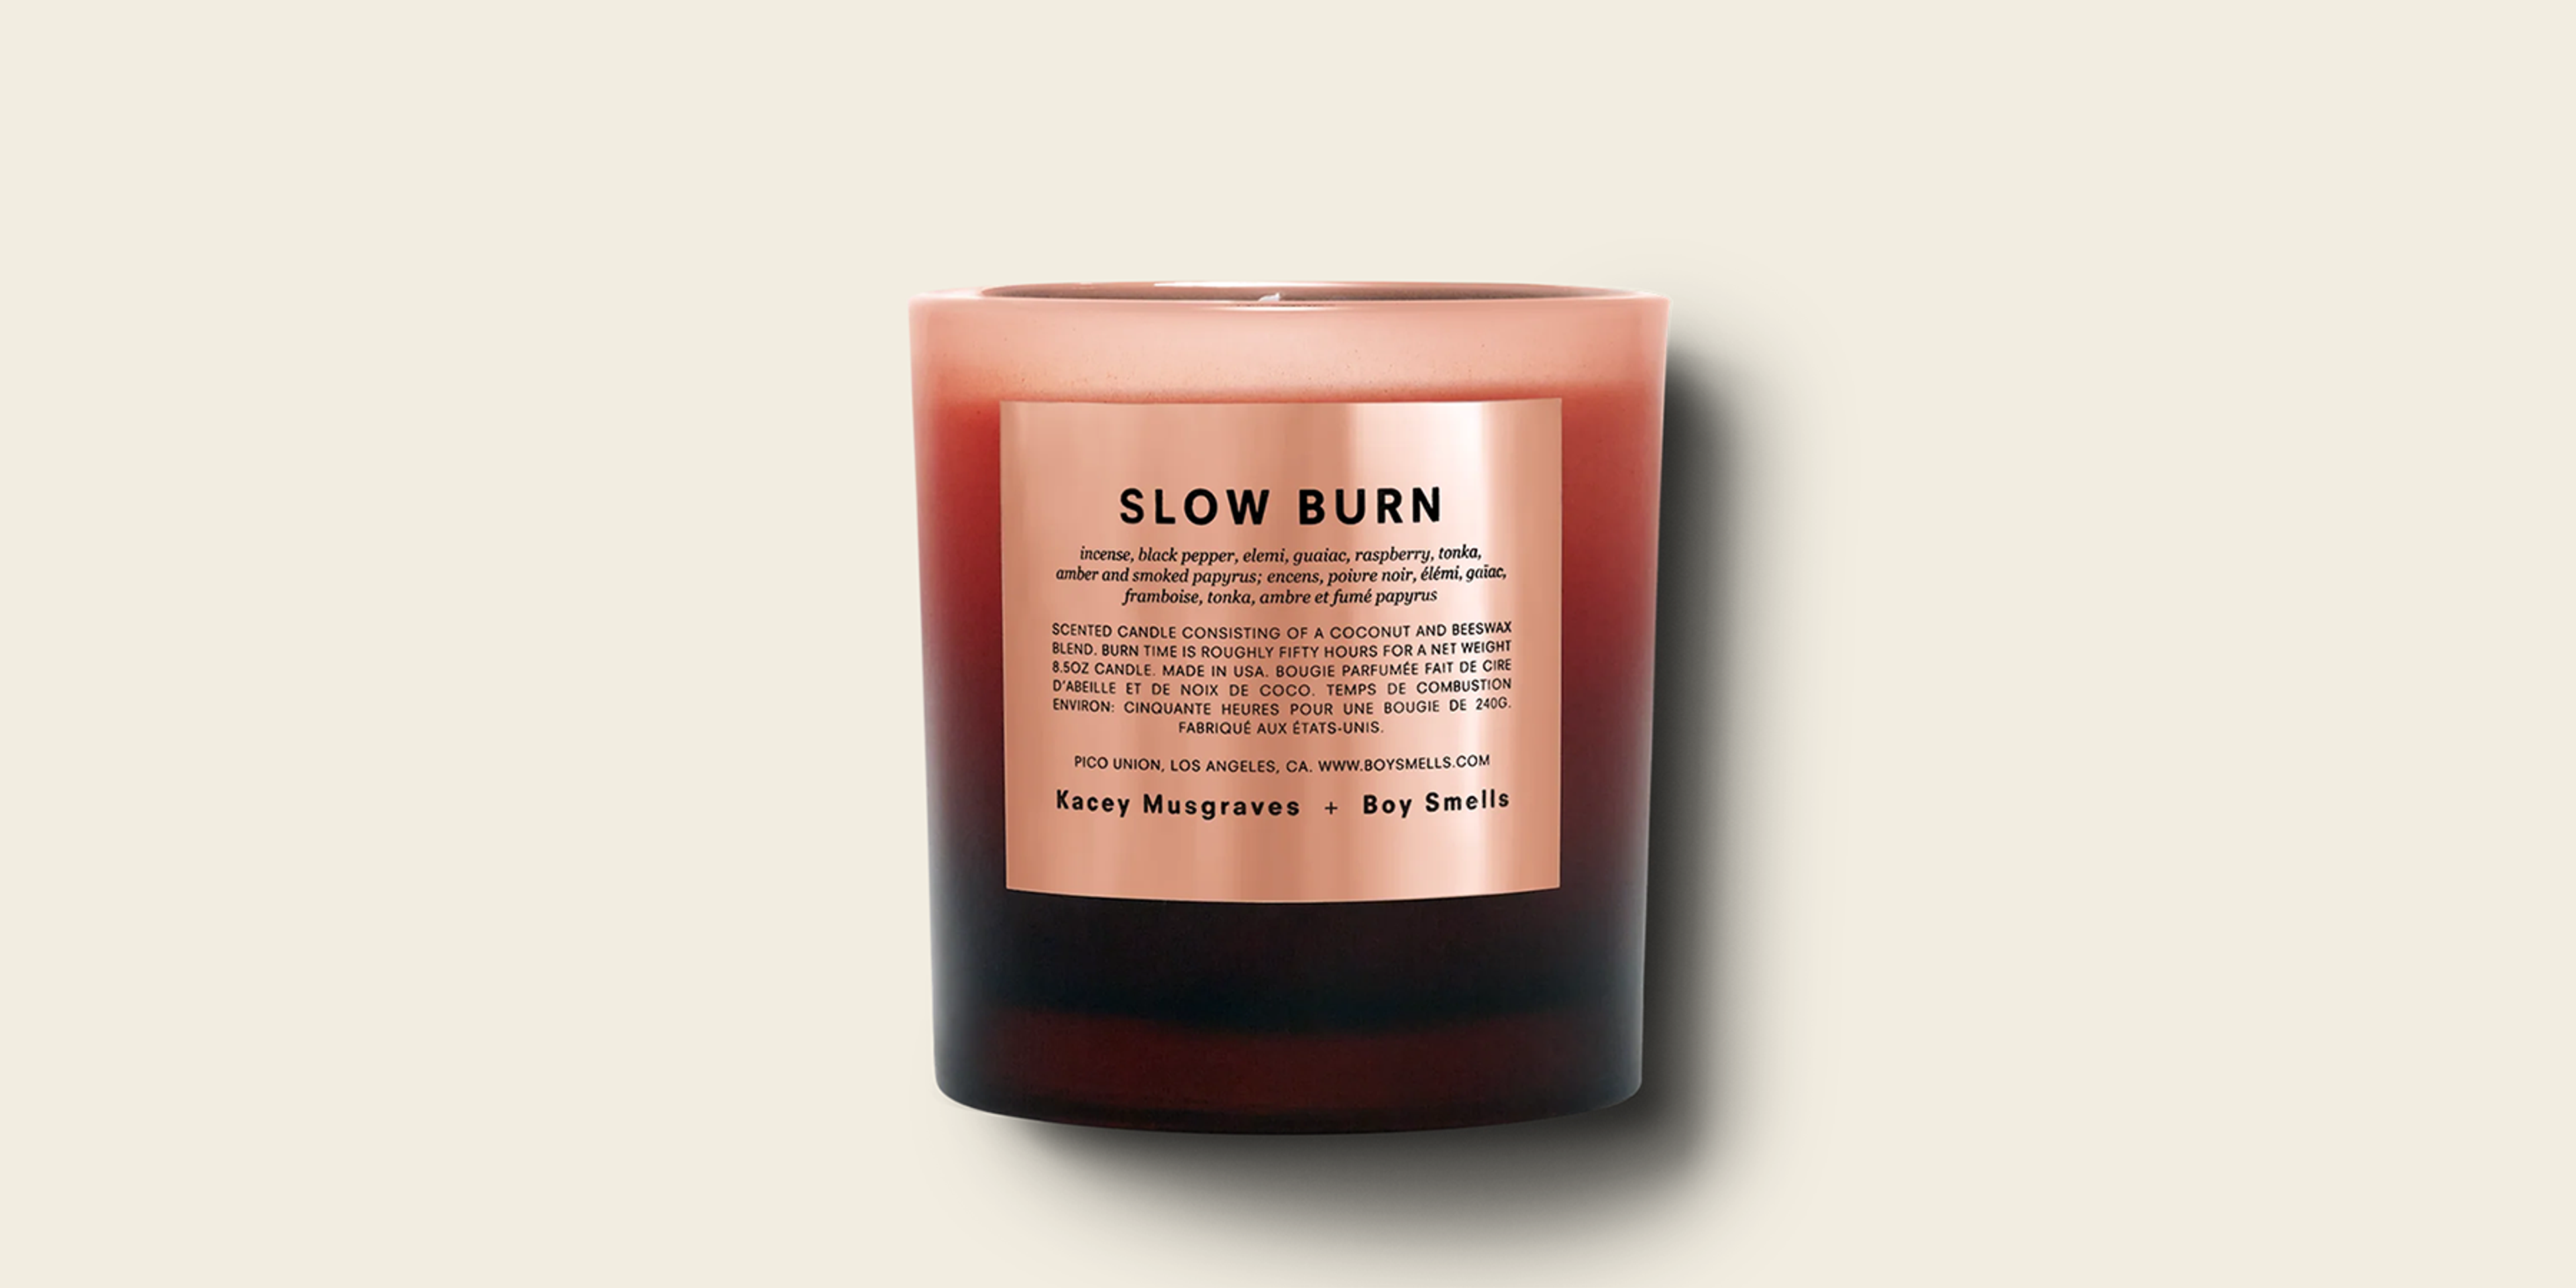 Slow Burn candle in red